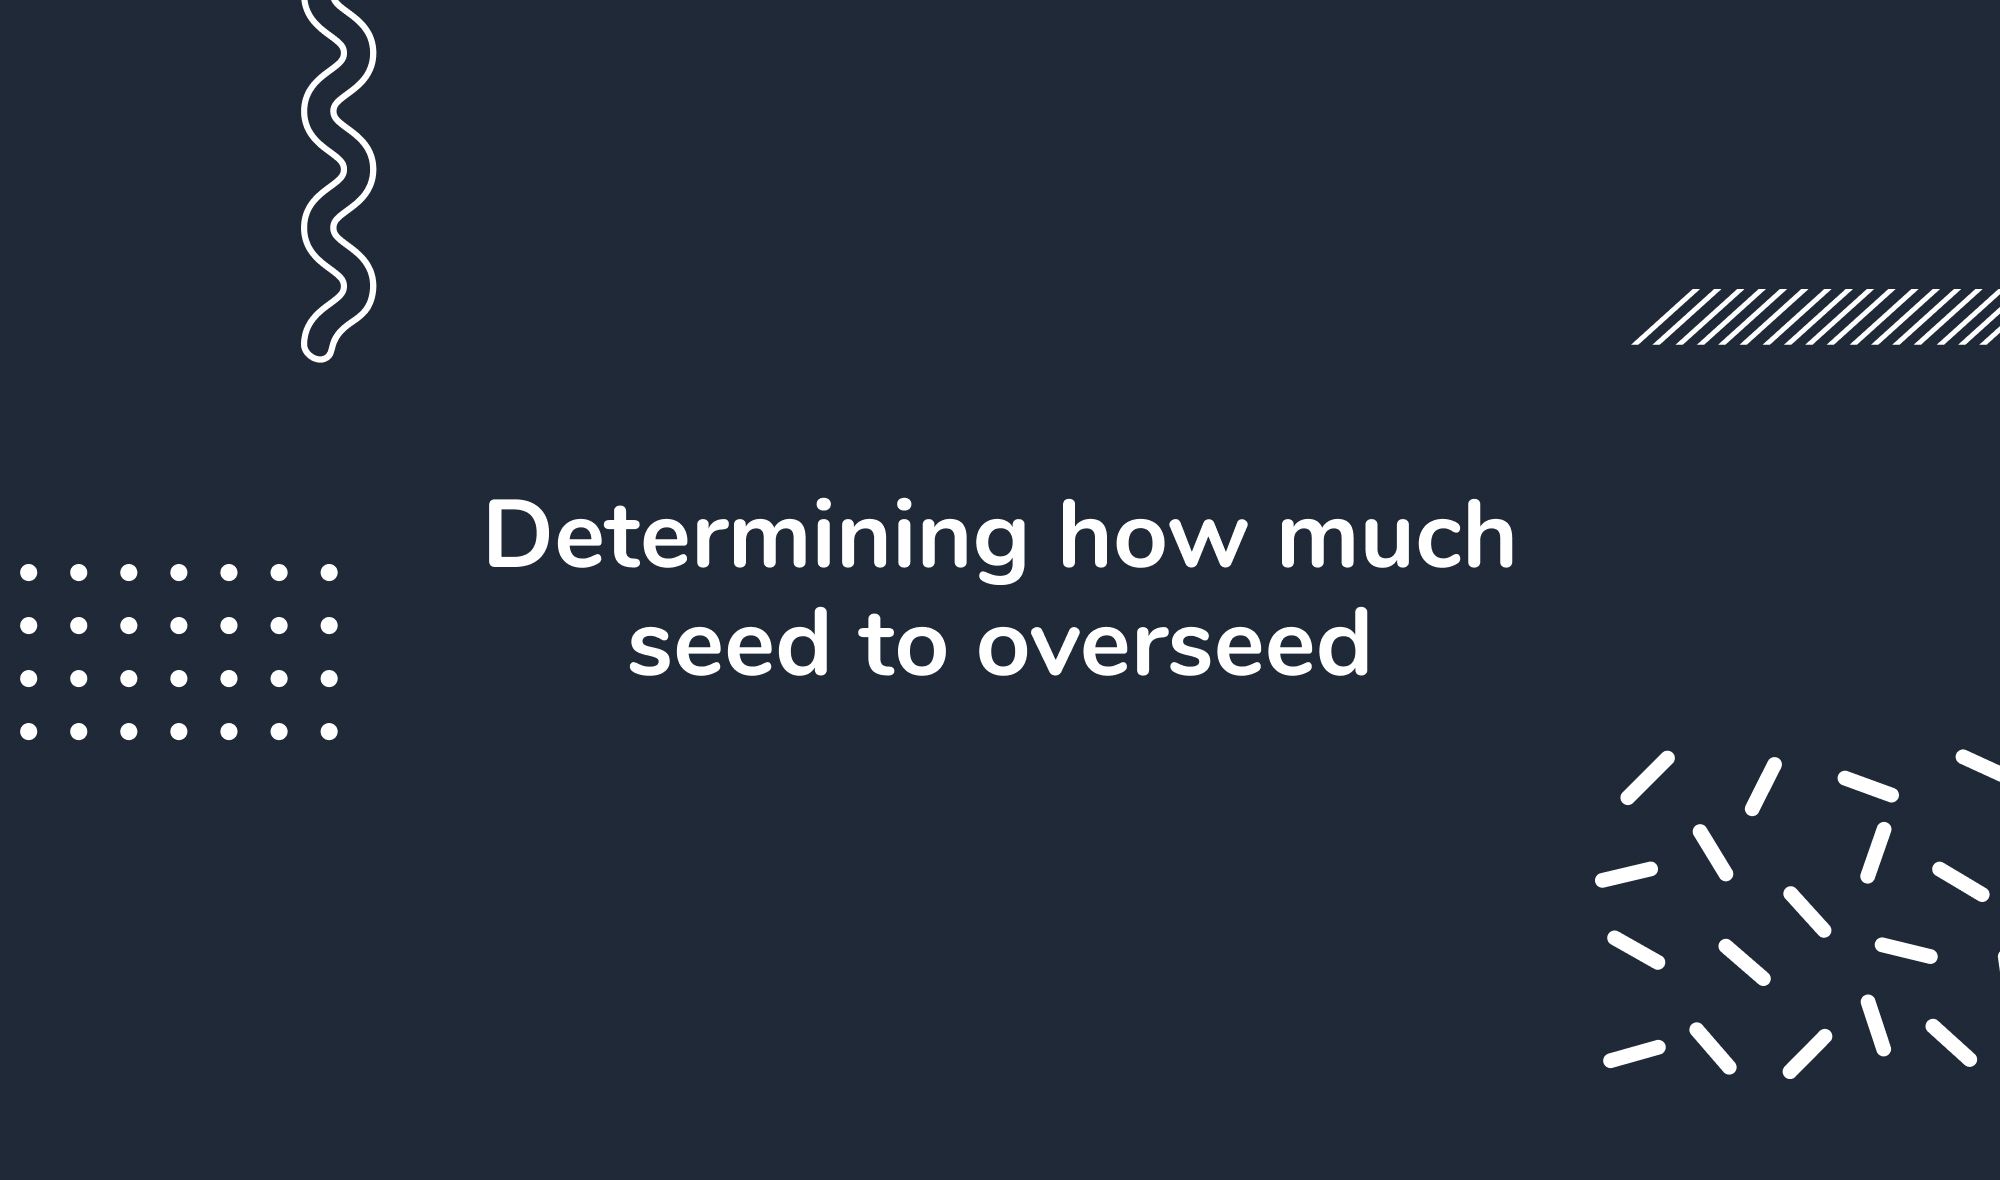 Determining how much seed to overseed